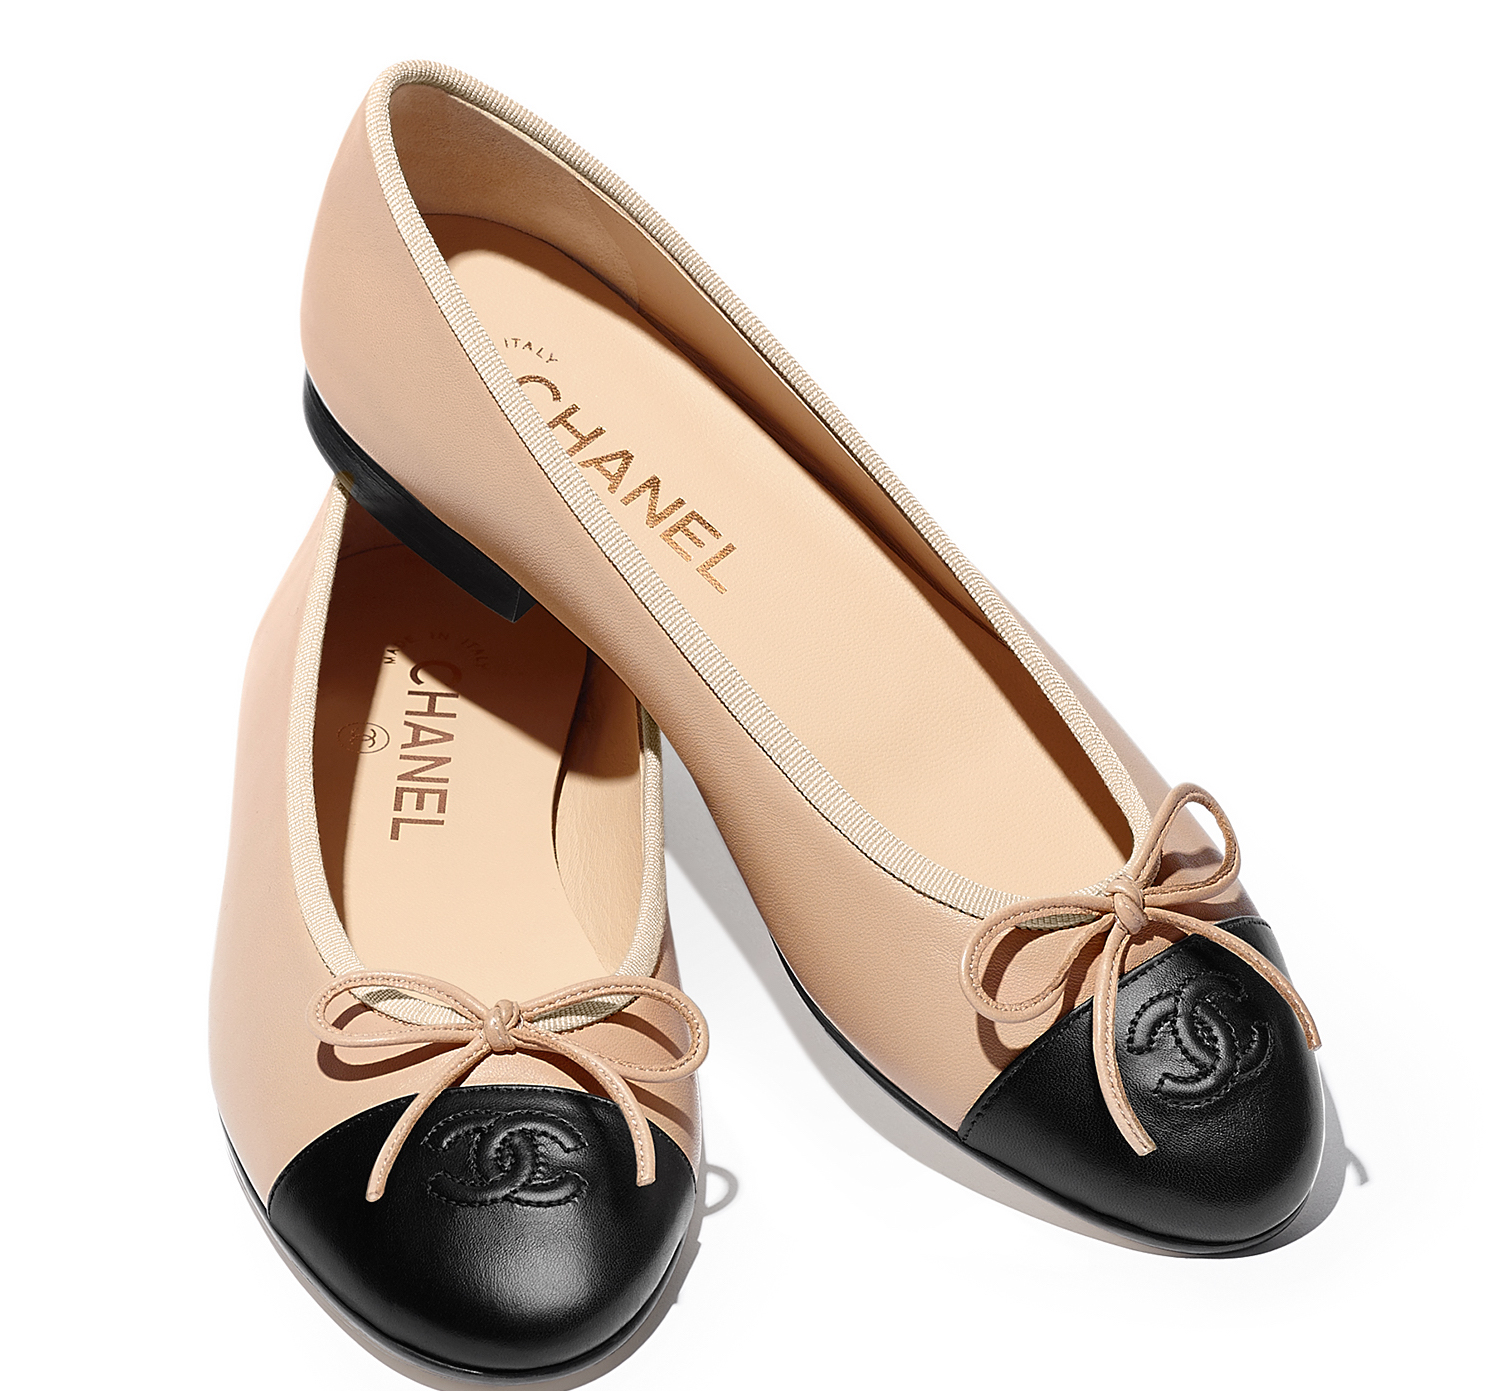 10 Stylish Flats That Mums Should Invest In - Mummyfique